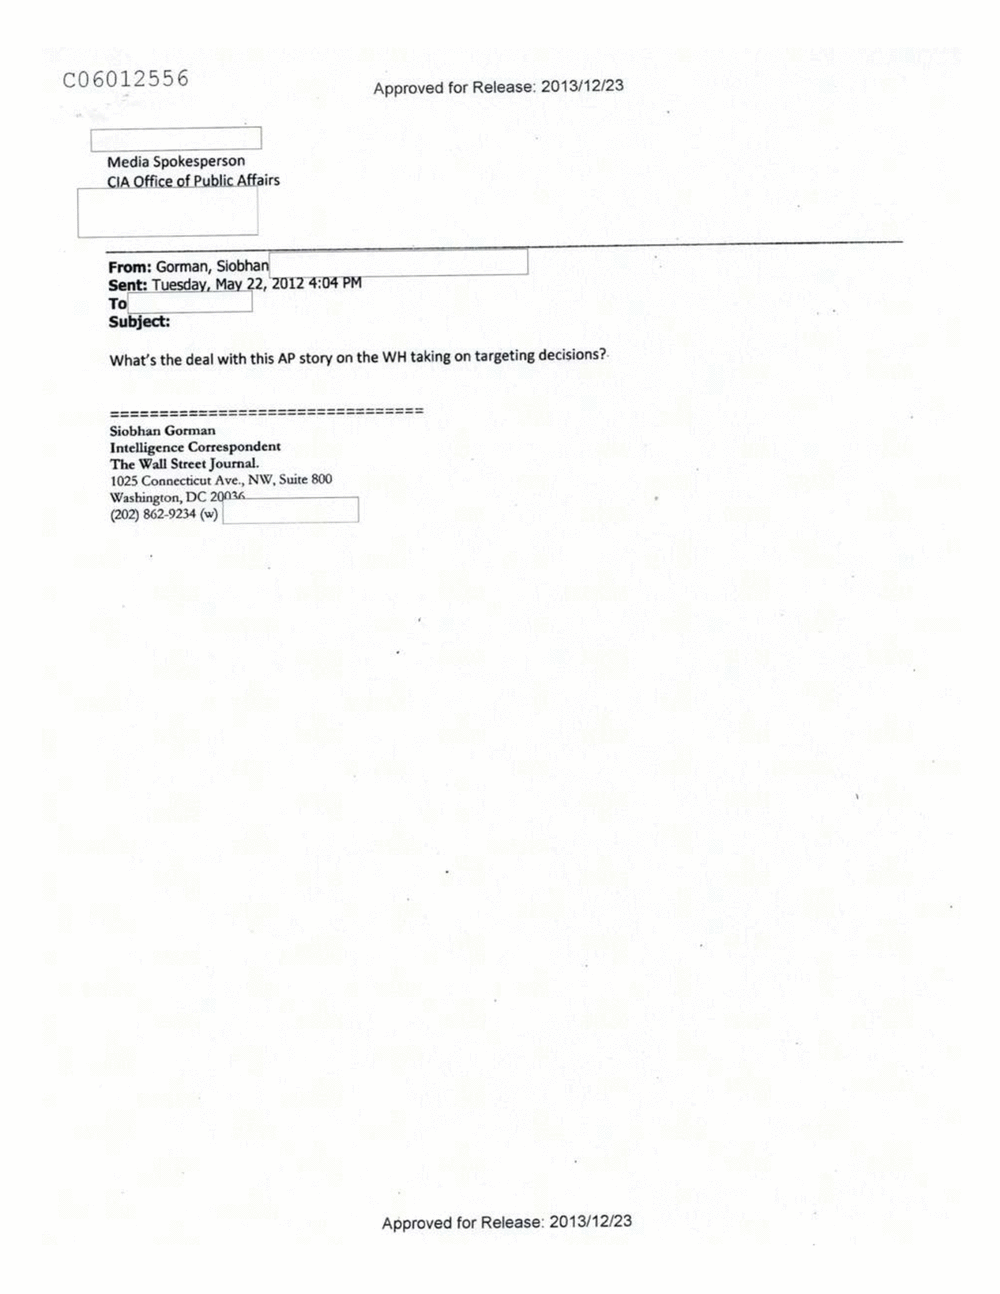 Page 157 from Email Correspondence Between Reporters and CIA Flacks